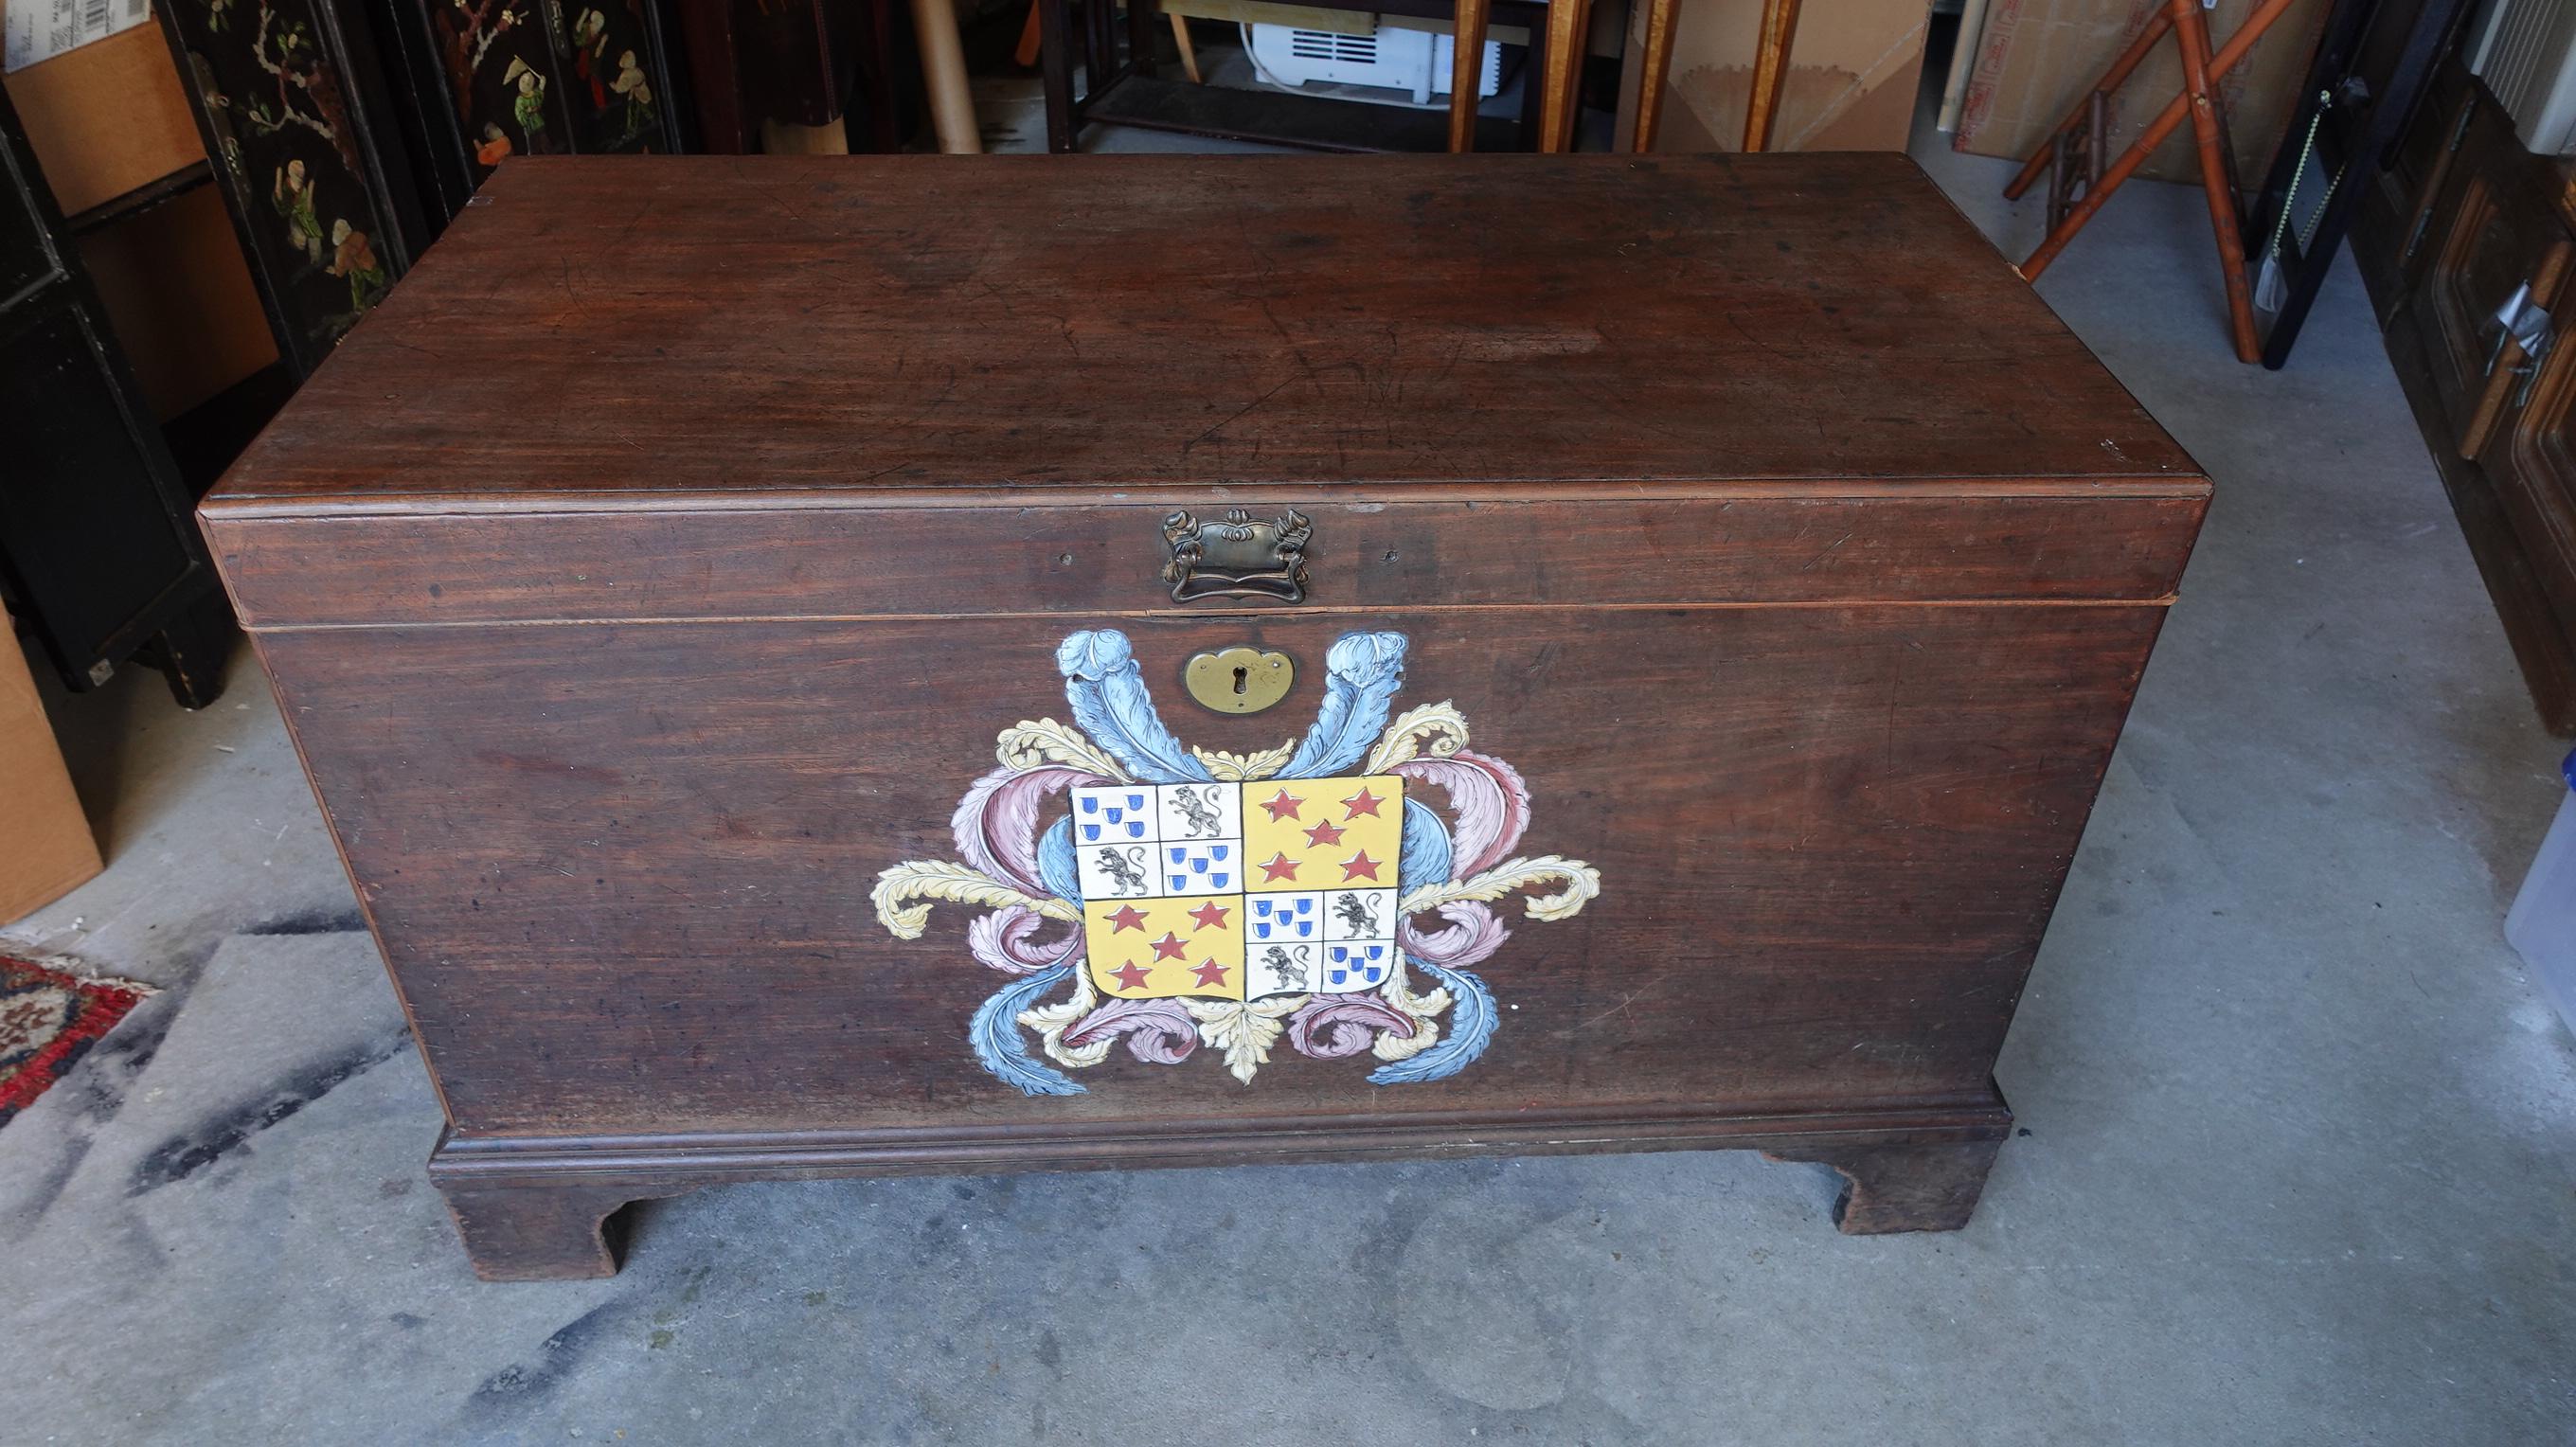 Large mahogany armorial lift top chest, on bracket feet, early 19th century, height 28 inches, top 23 x 48 inches.
The design with hand-painted the Coat of Arm, from the late 18th century to the early 19th century.